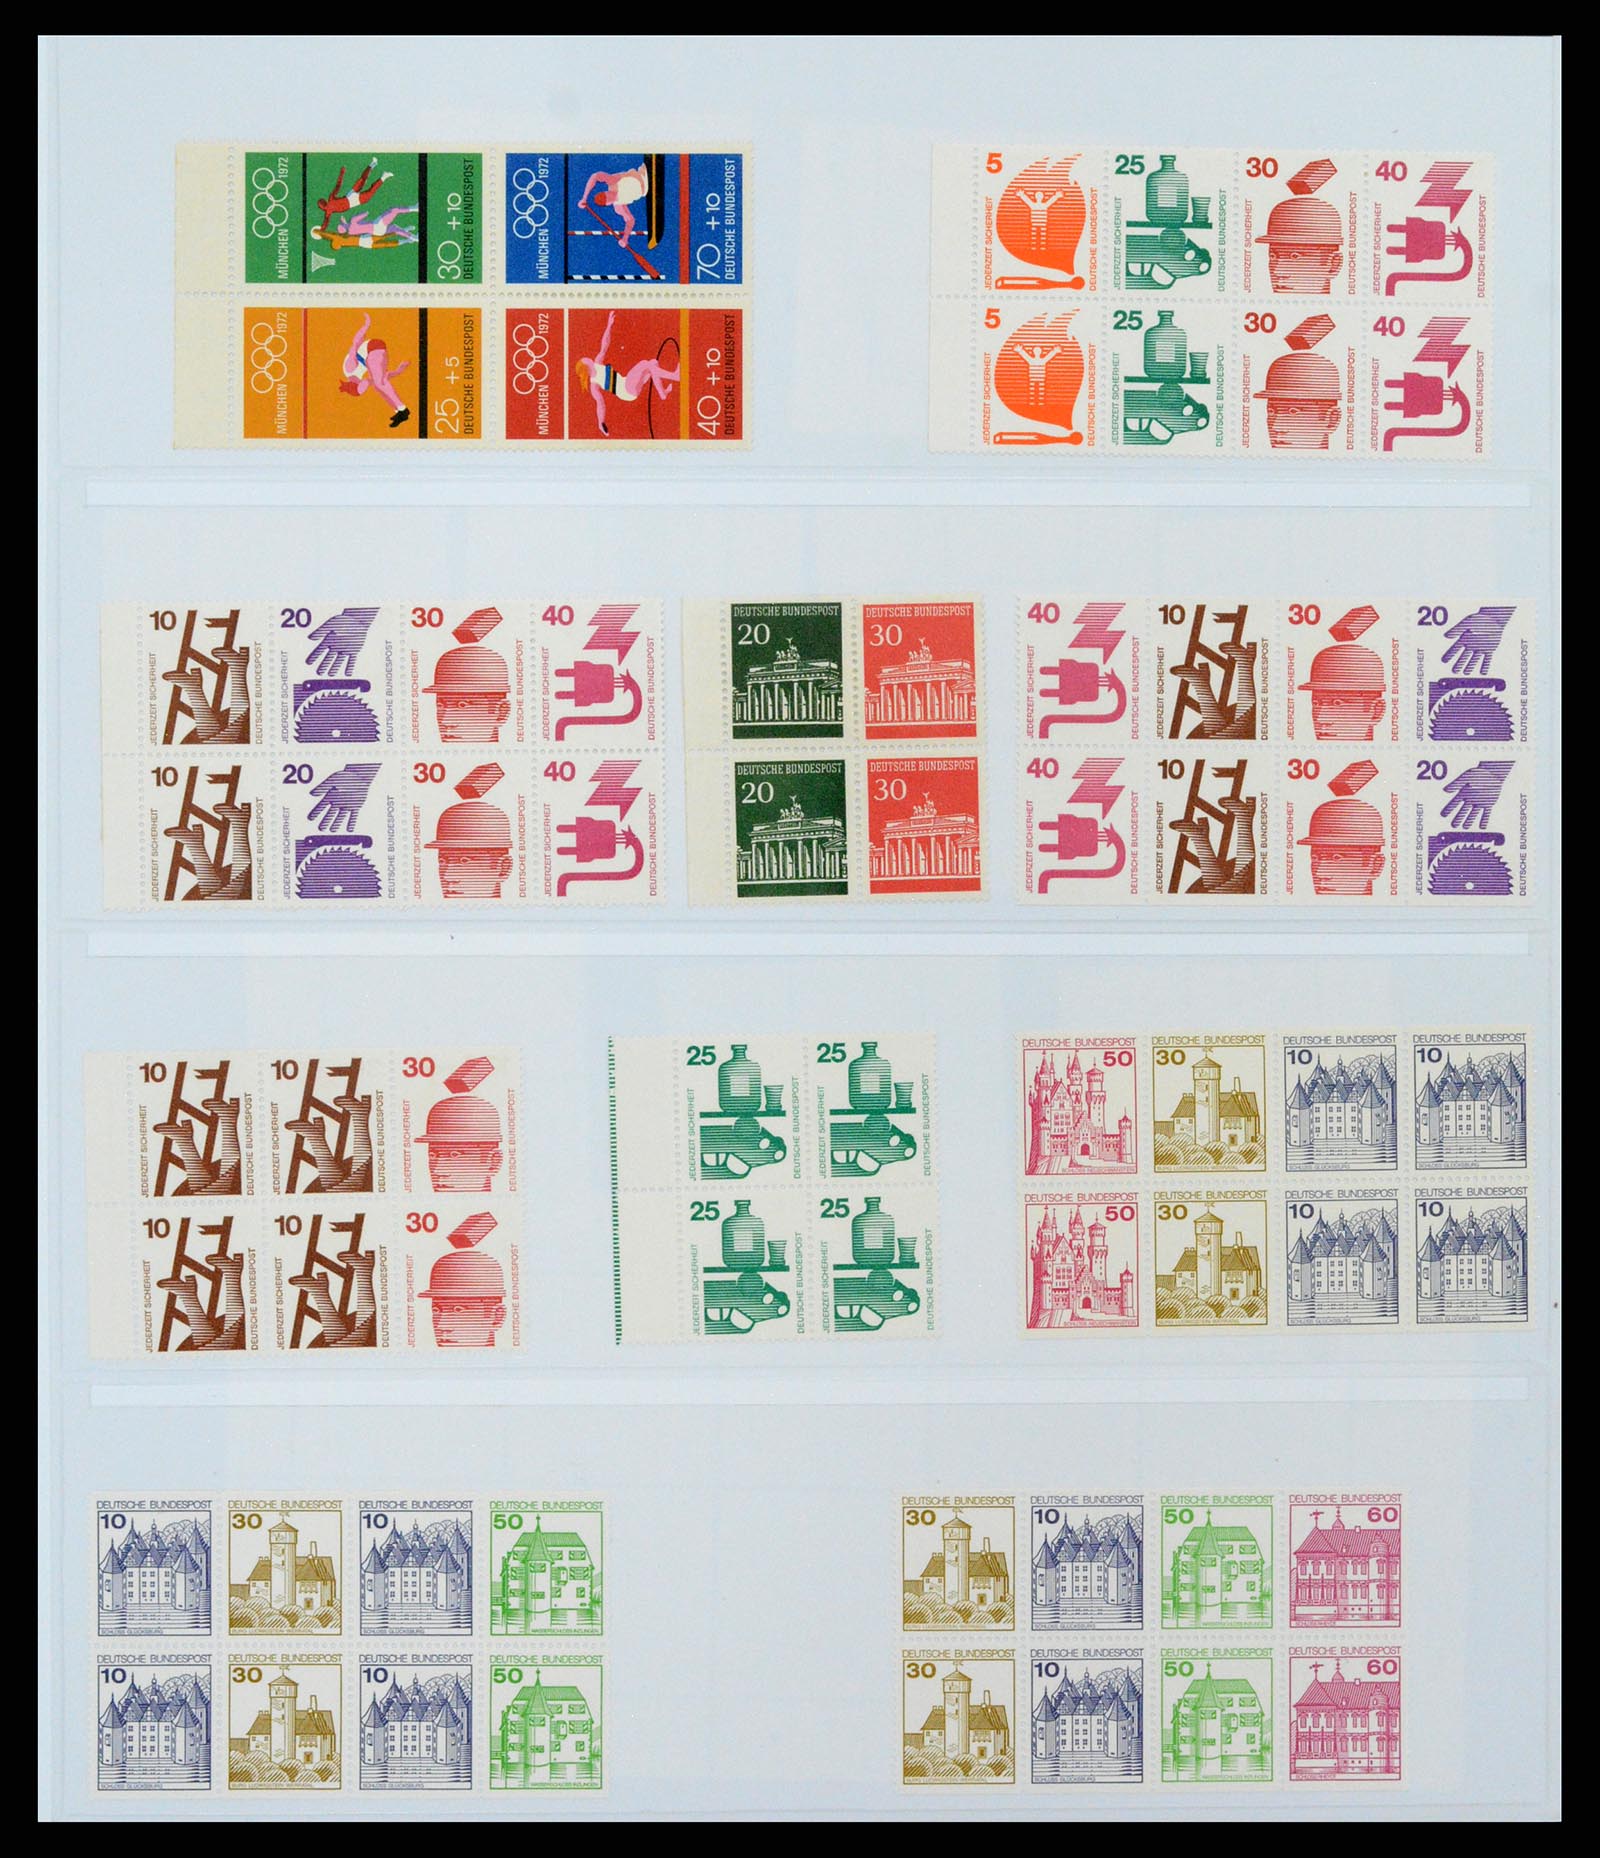 37336 019 - Stamp collection 37336 Bundespost combinations 1955-1980.